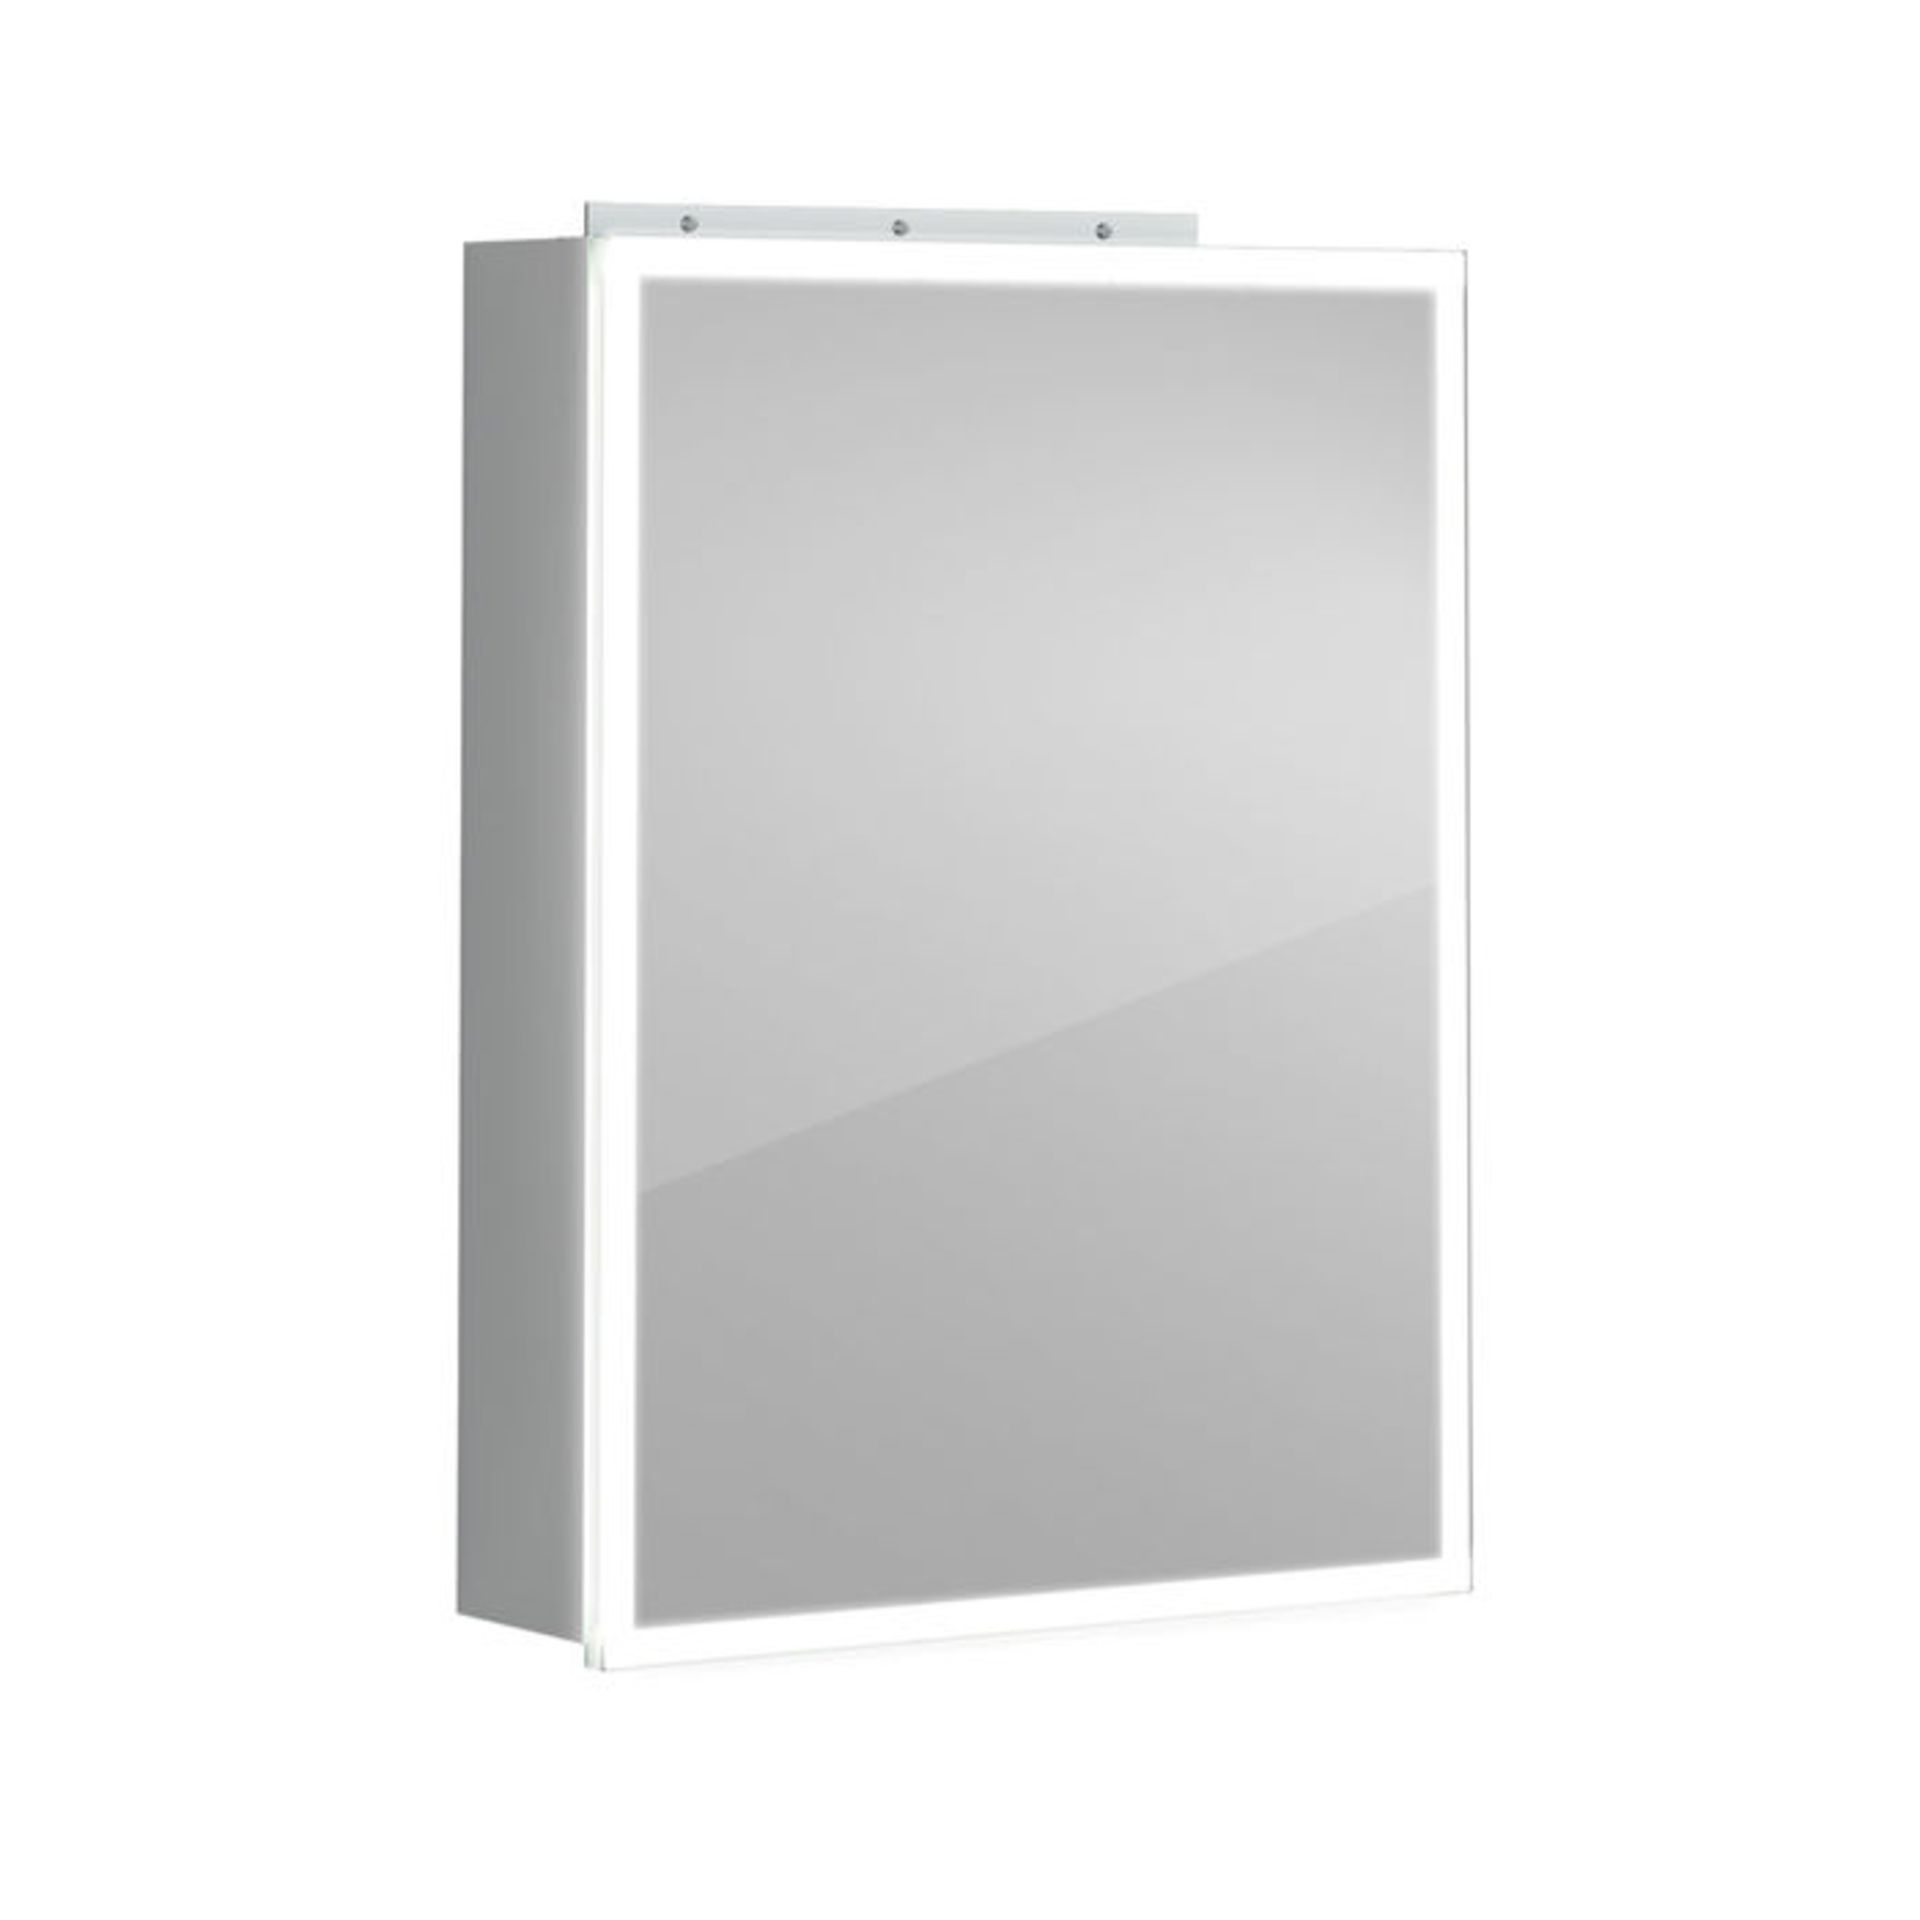 (SP58) 450x600 Cosmic Illuminated LED Mirror Cabinet. RRP £574.99. We love this mirror cabinet as it - Image 5 of 5